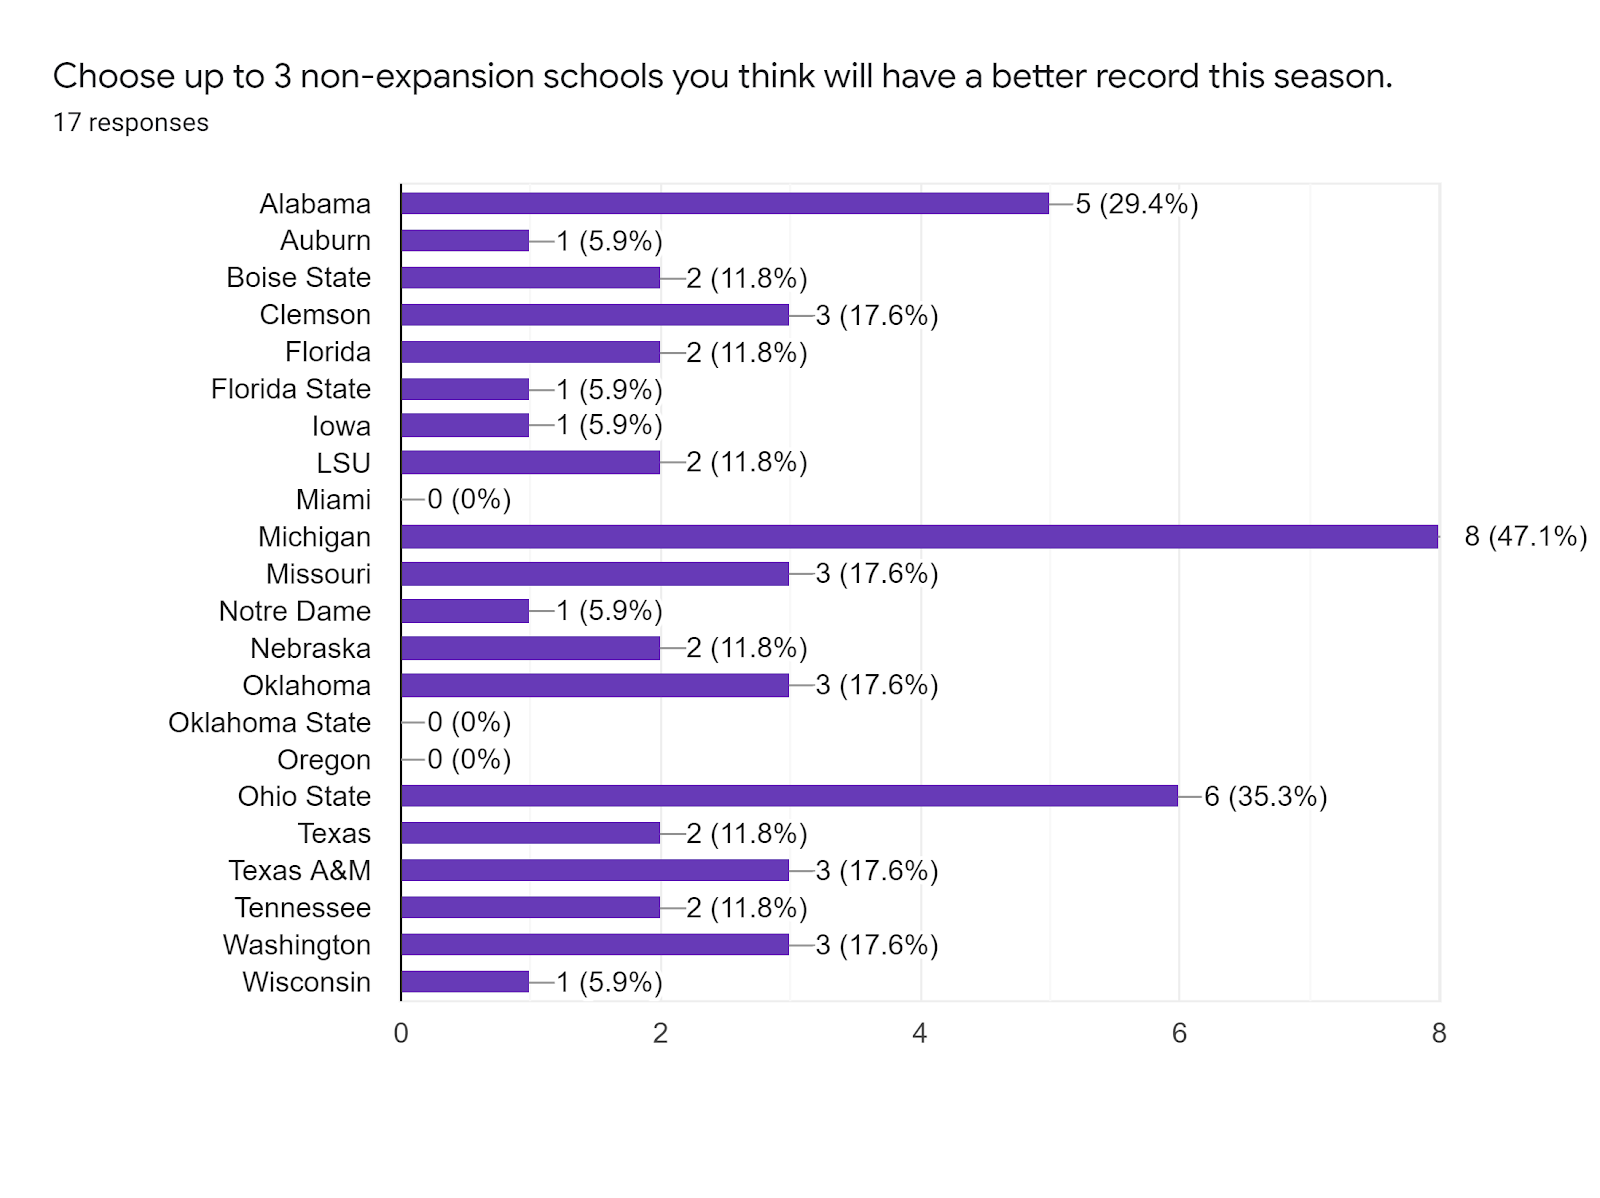 Forms response chart. Question title: Choose up to 3 non-expansion schools you think will have a better record this season.. Number of responses: 17 responses.